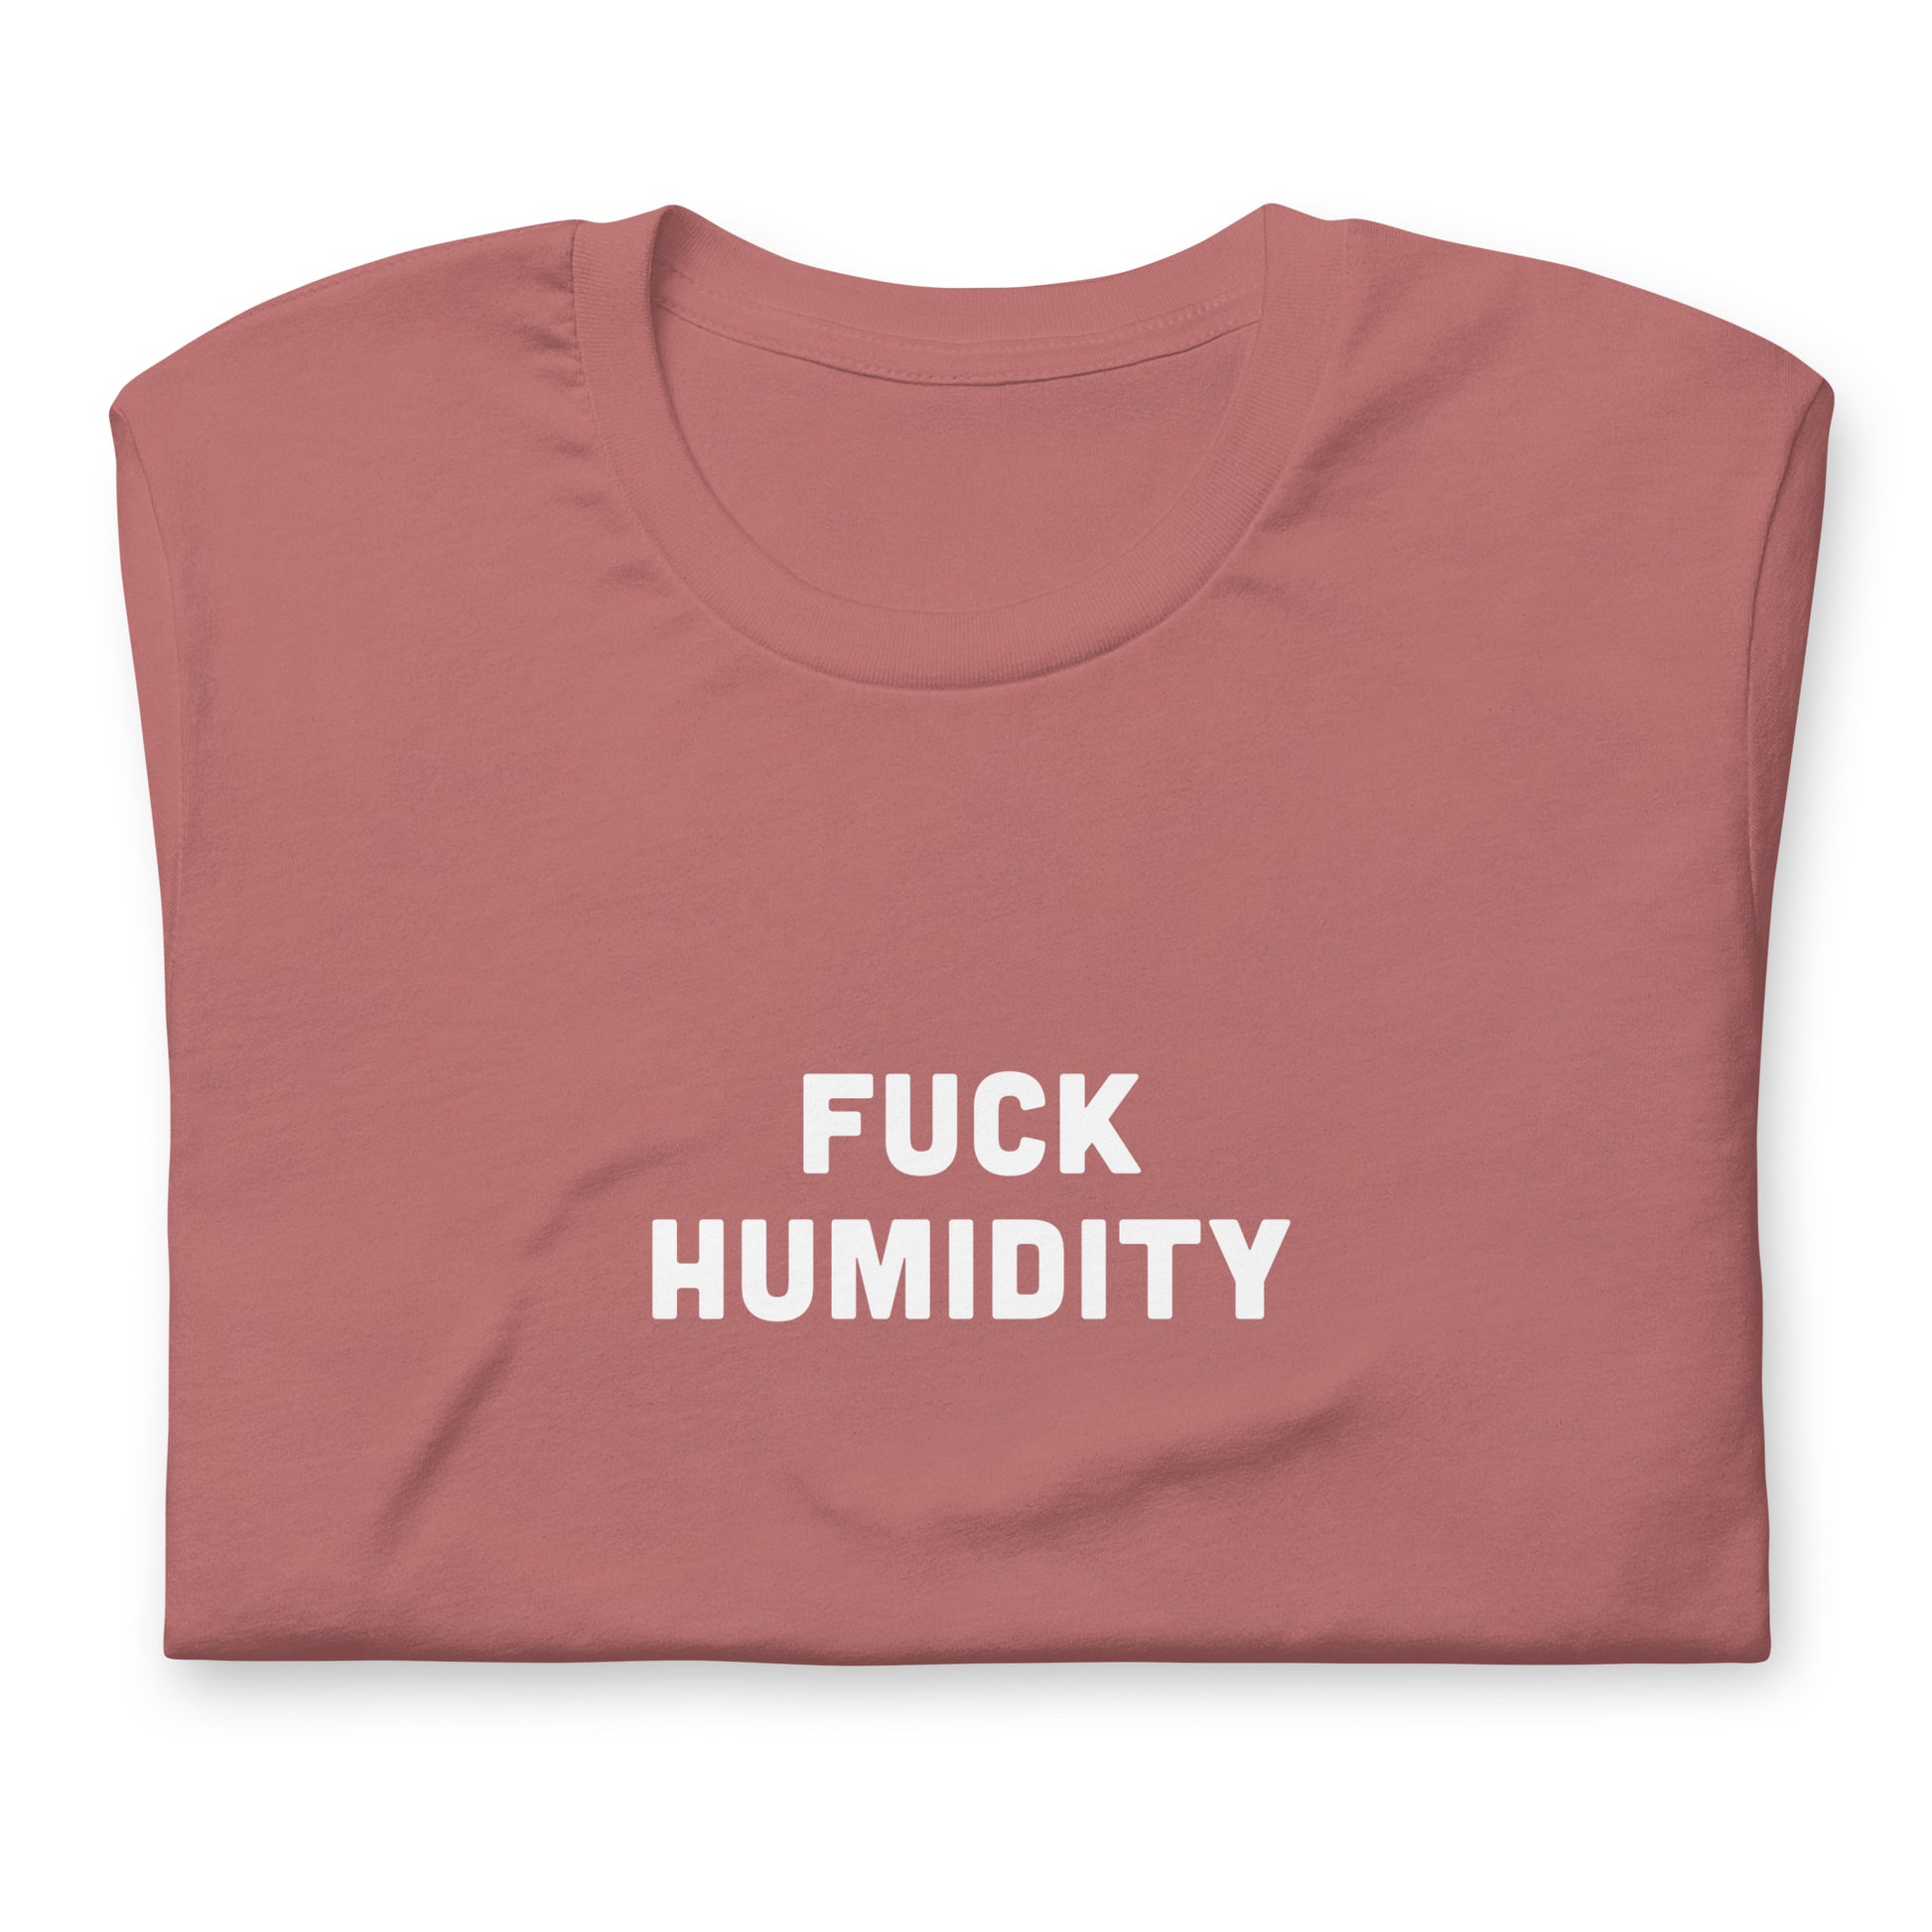 Fuck Humidity T-Shirt Size 2XL Color Navy